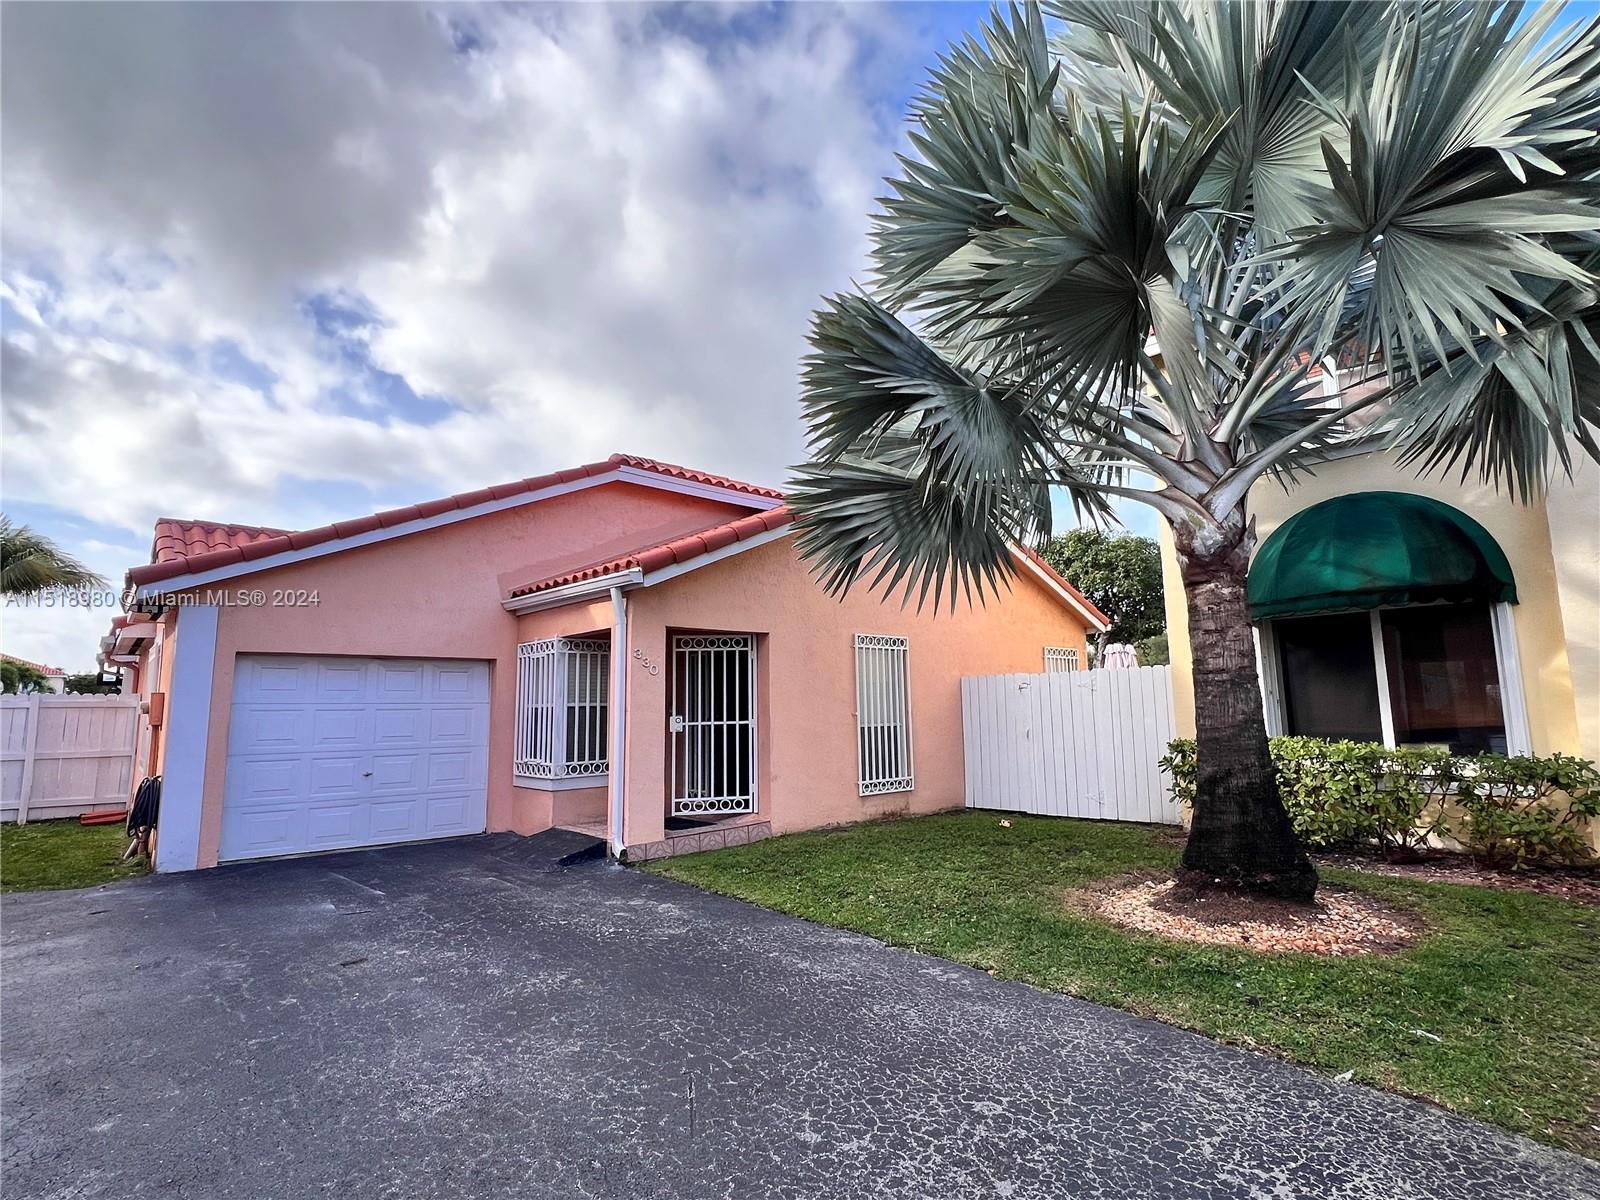 Photo of 330 NW 86th Ct in Miami, FL